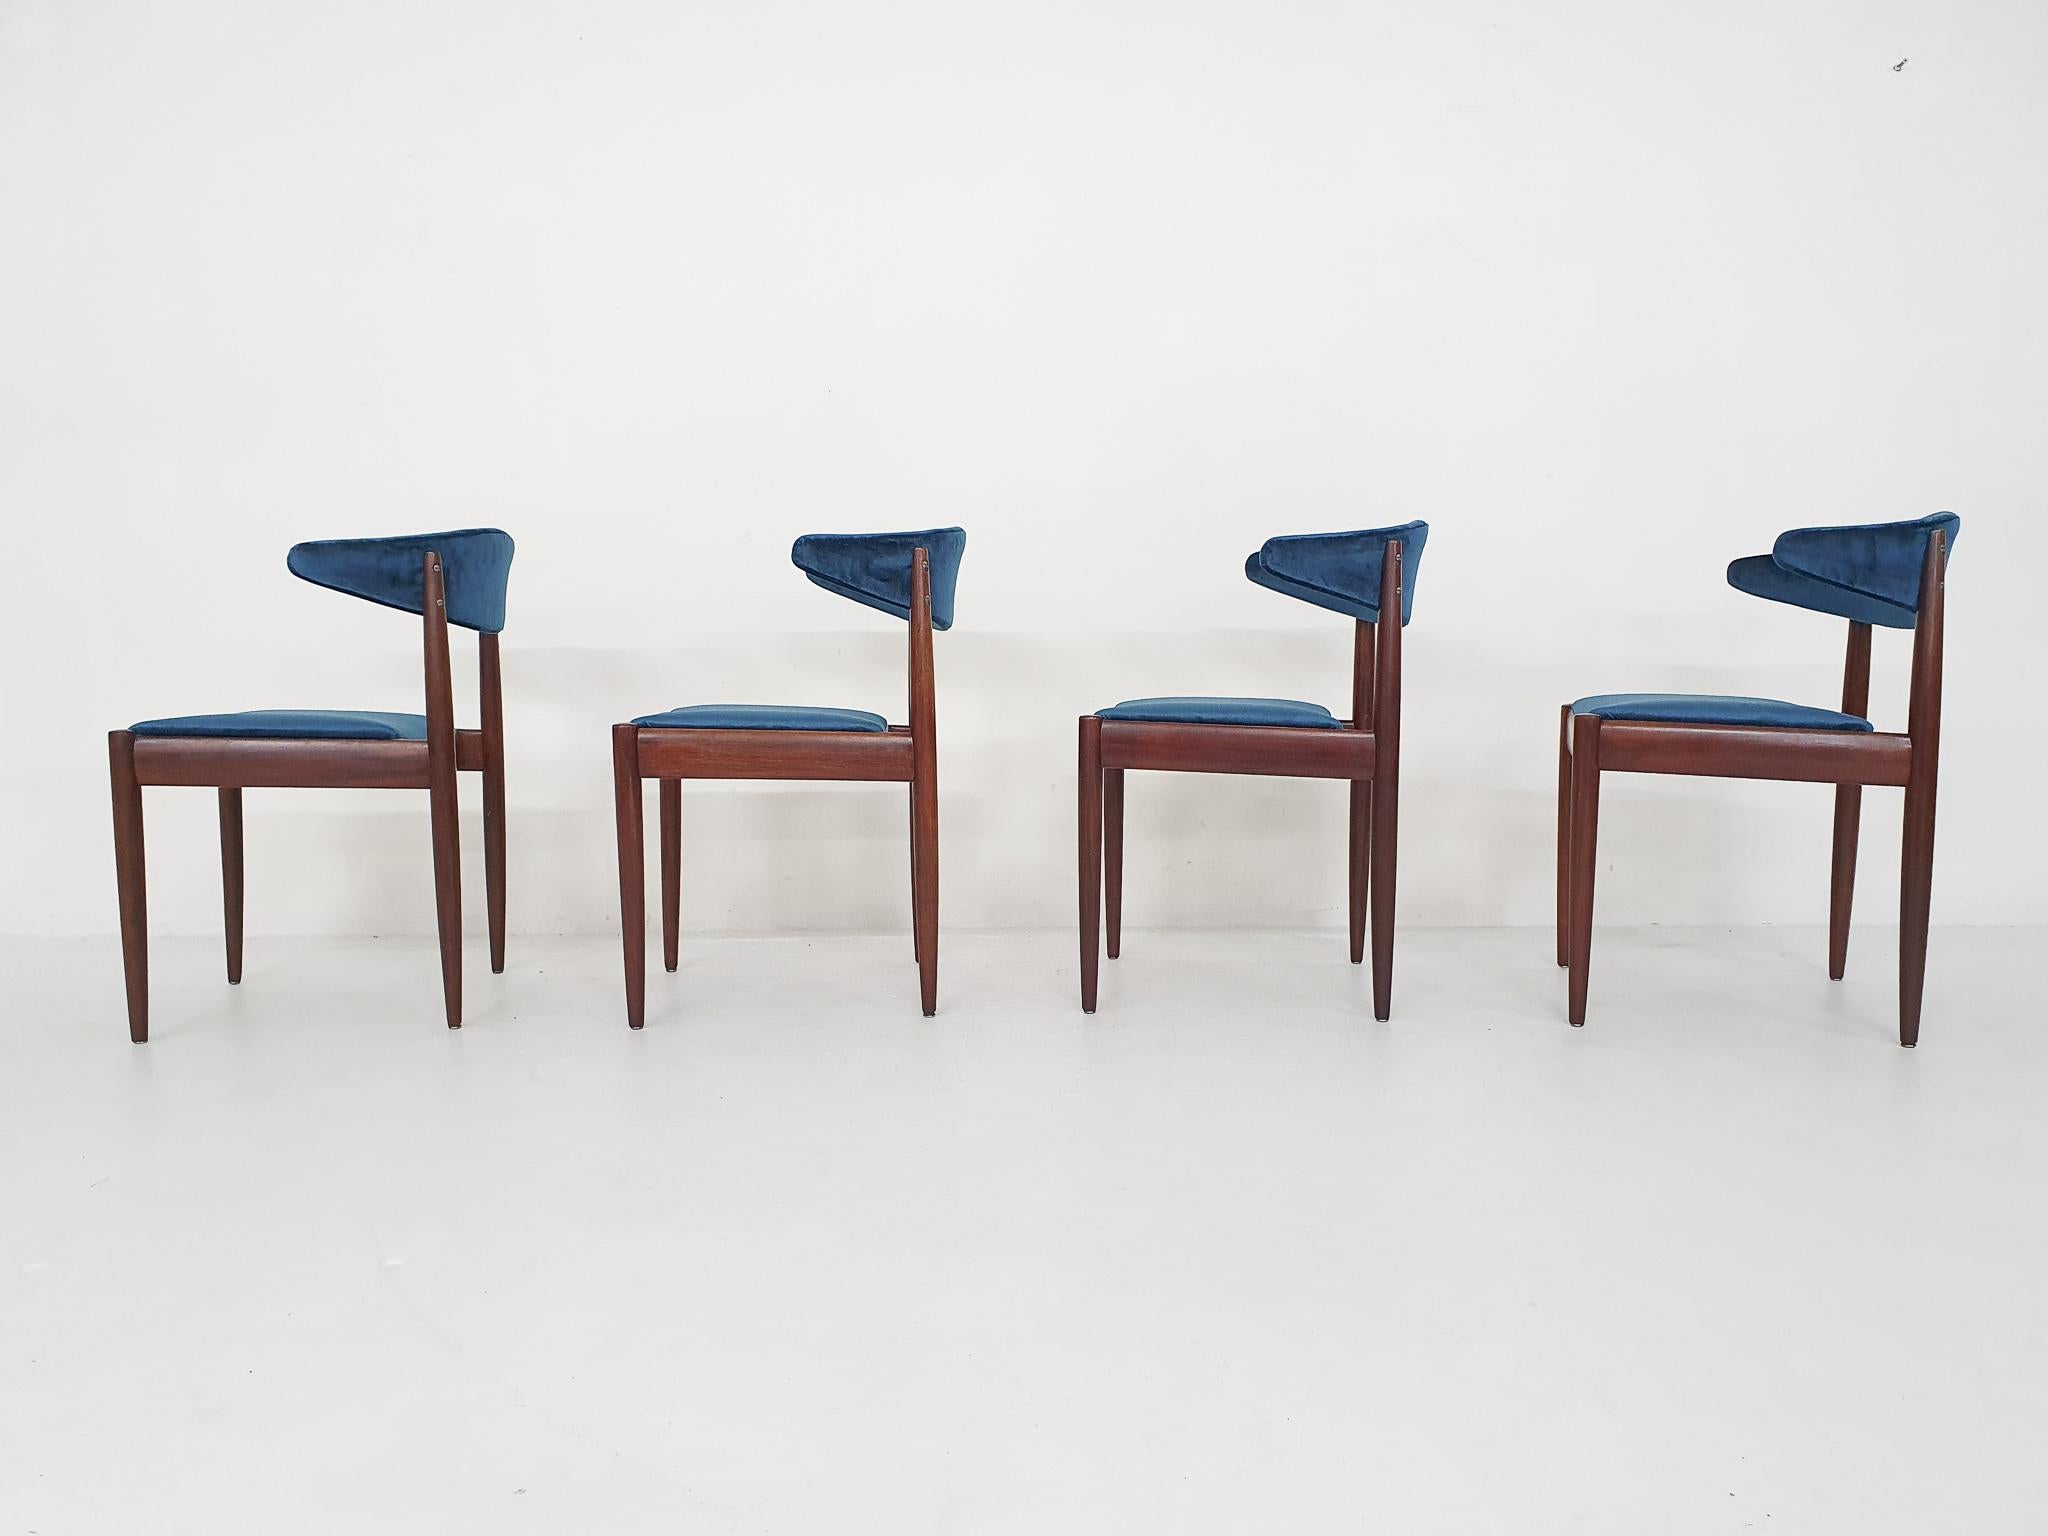 Set of Four Rosewood and Velvet Dining Chairs by Topform, the Netherlands 1950's For Sale 1